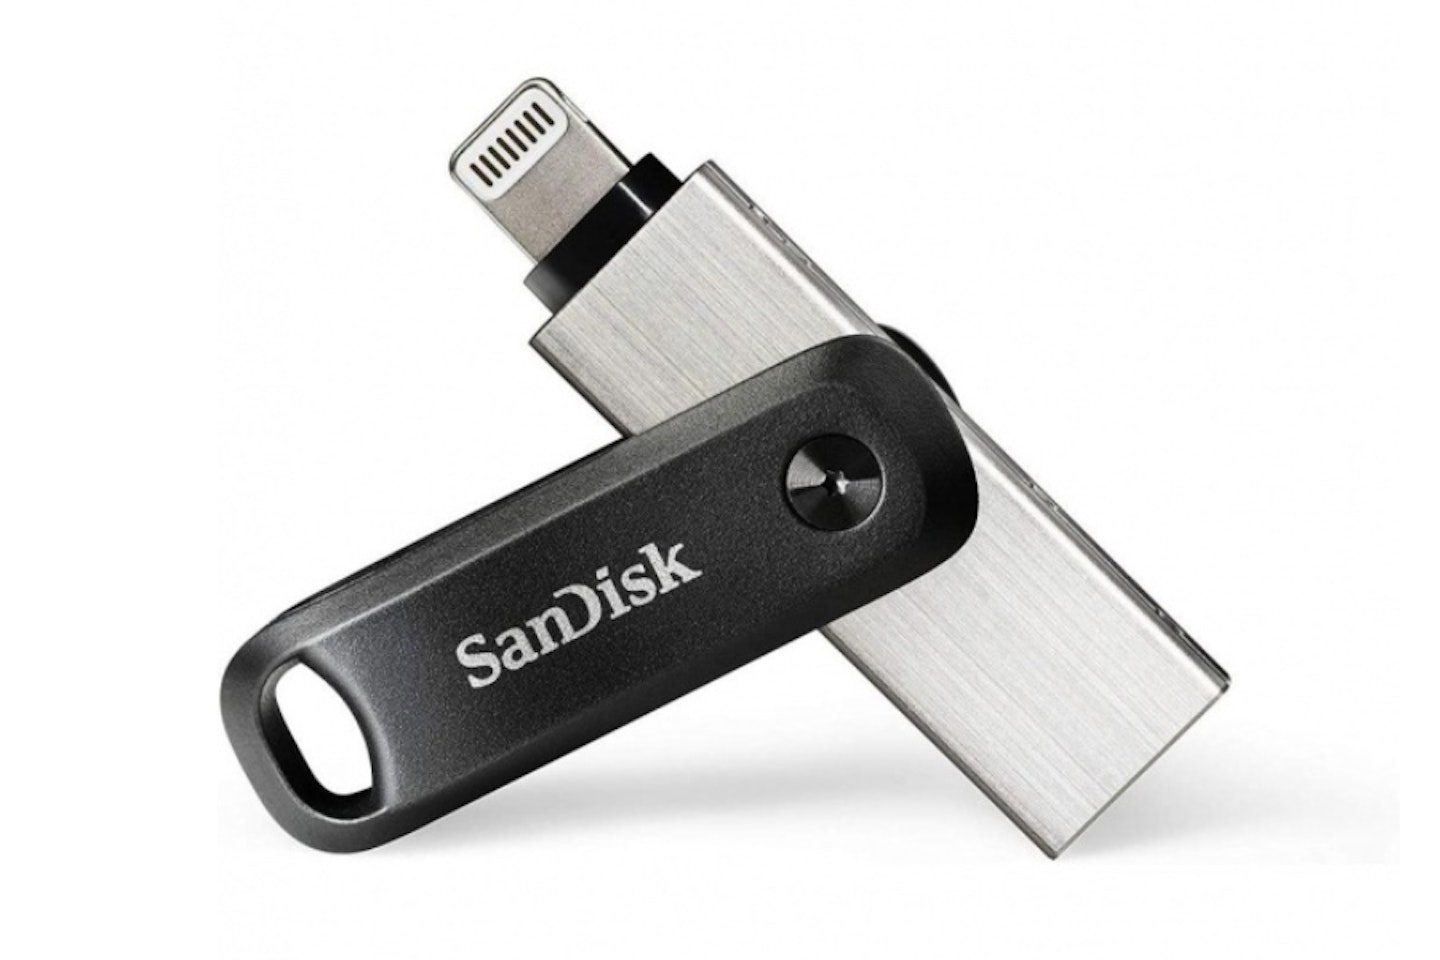 SanDisk 128GB iXpand Flash Drive Go with Lightning and USB 3.0 connectors-A Flash Drive- one of the best ways to transfer photos from iPhone to USB stick